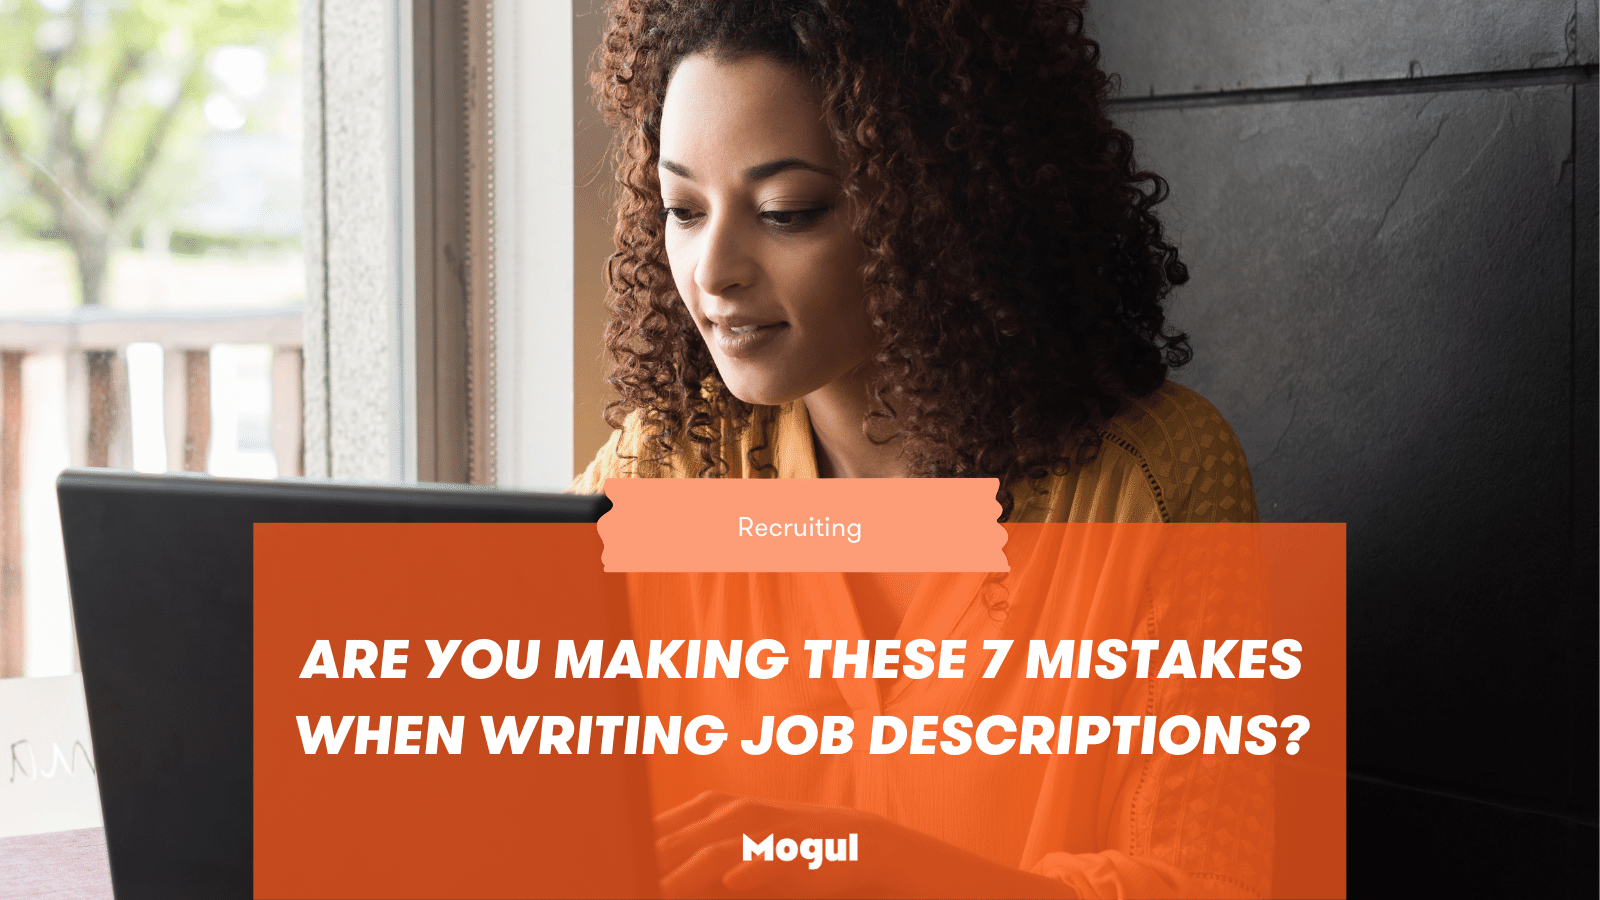 Are You Making These 7 Mistakes When Writing Job Descriptions?